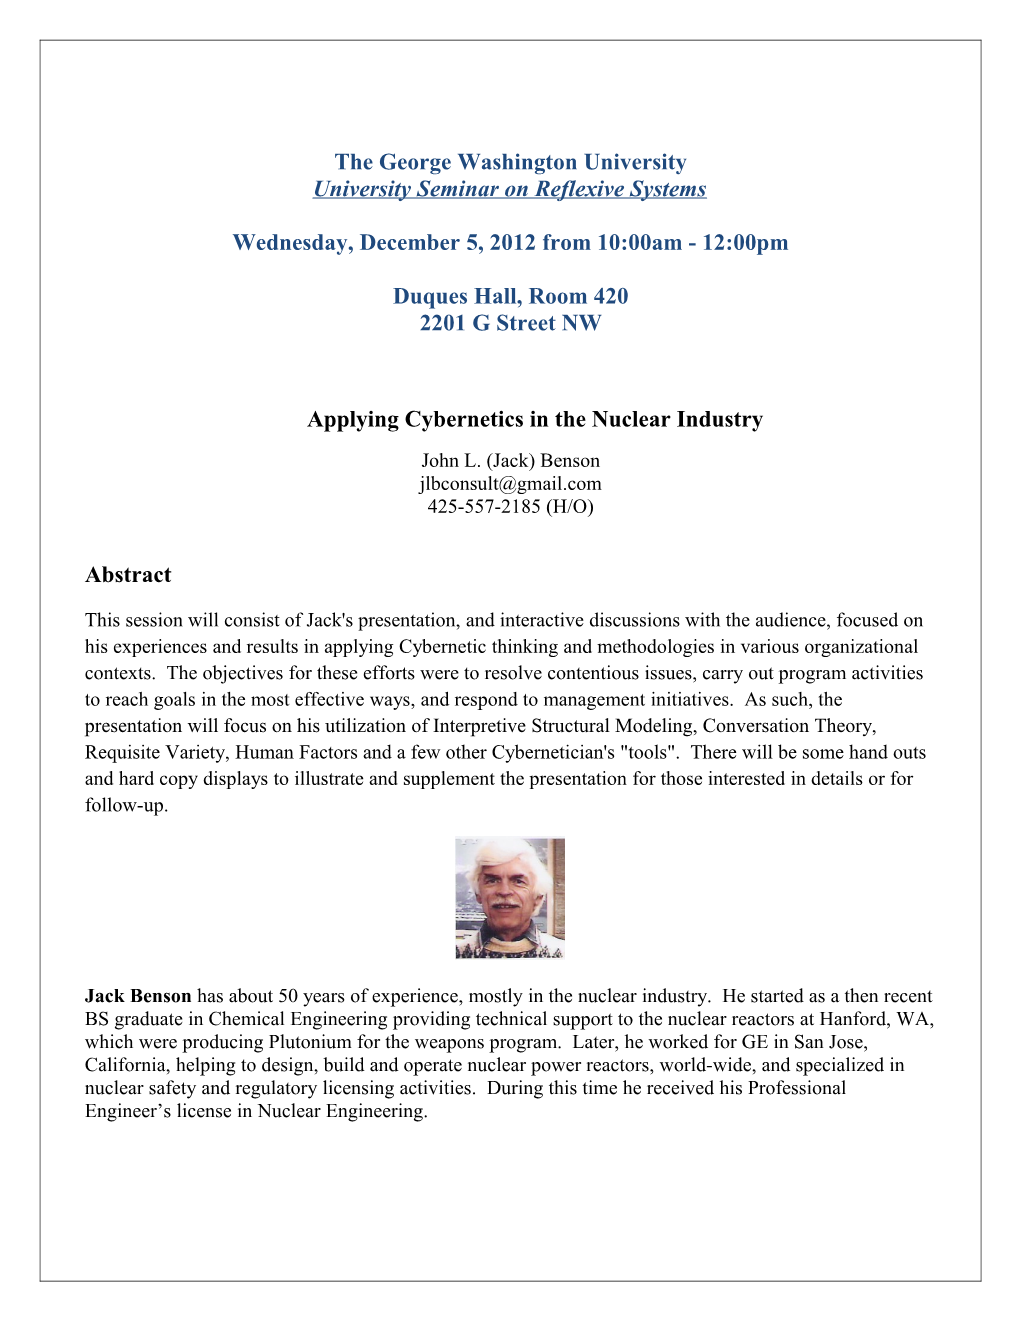 Abstract for University Seminar on Reflexive Systems at George Washington University, Feb